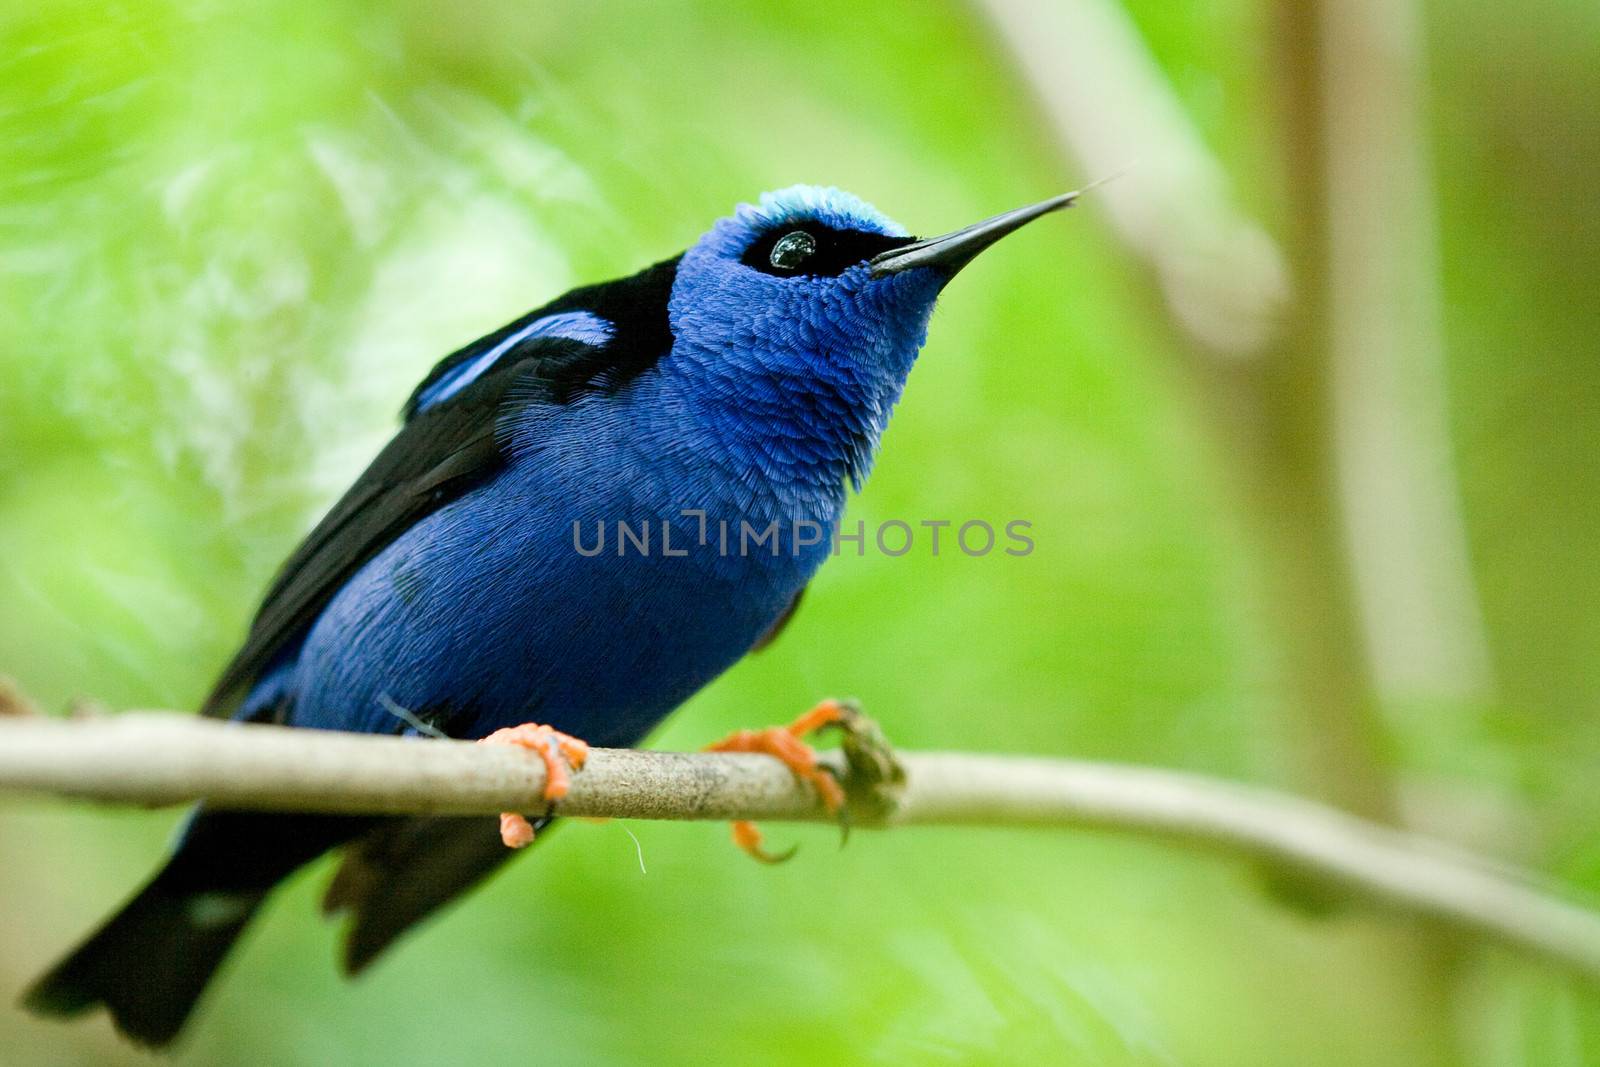 Bird with blue feathers, green nature background.